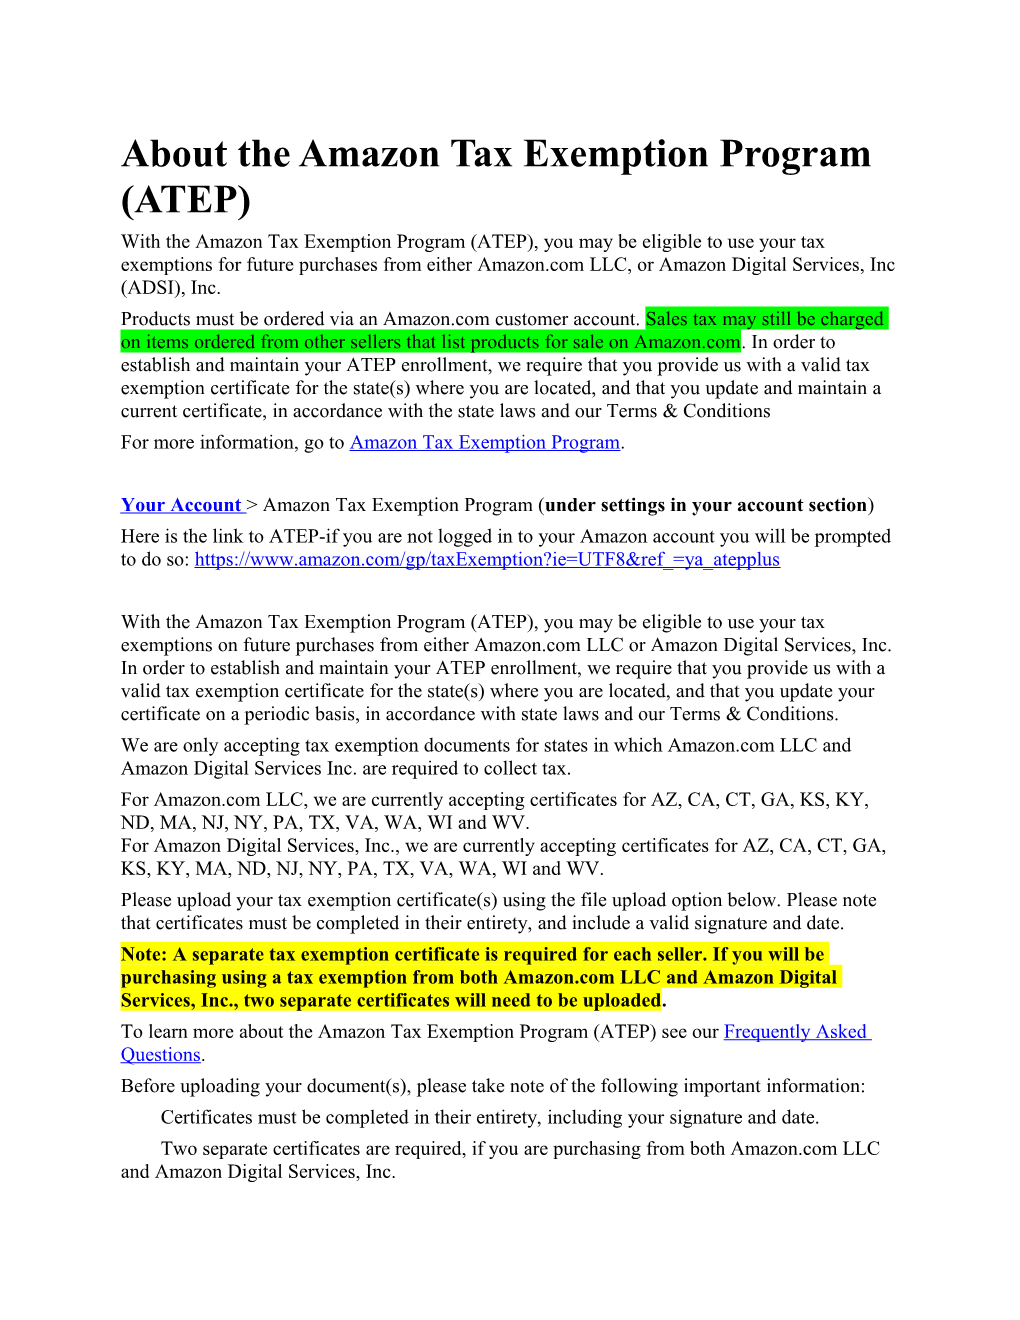 About the Amazon Tax Exemption Program (ATEP)